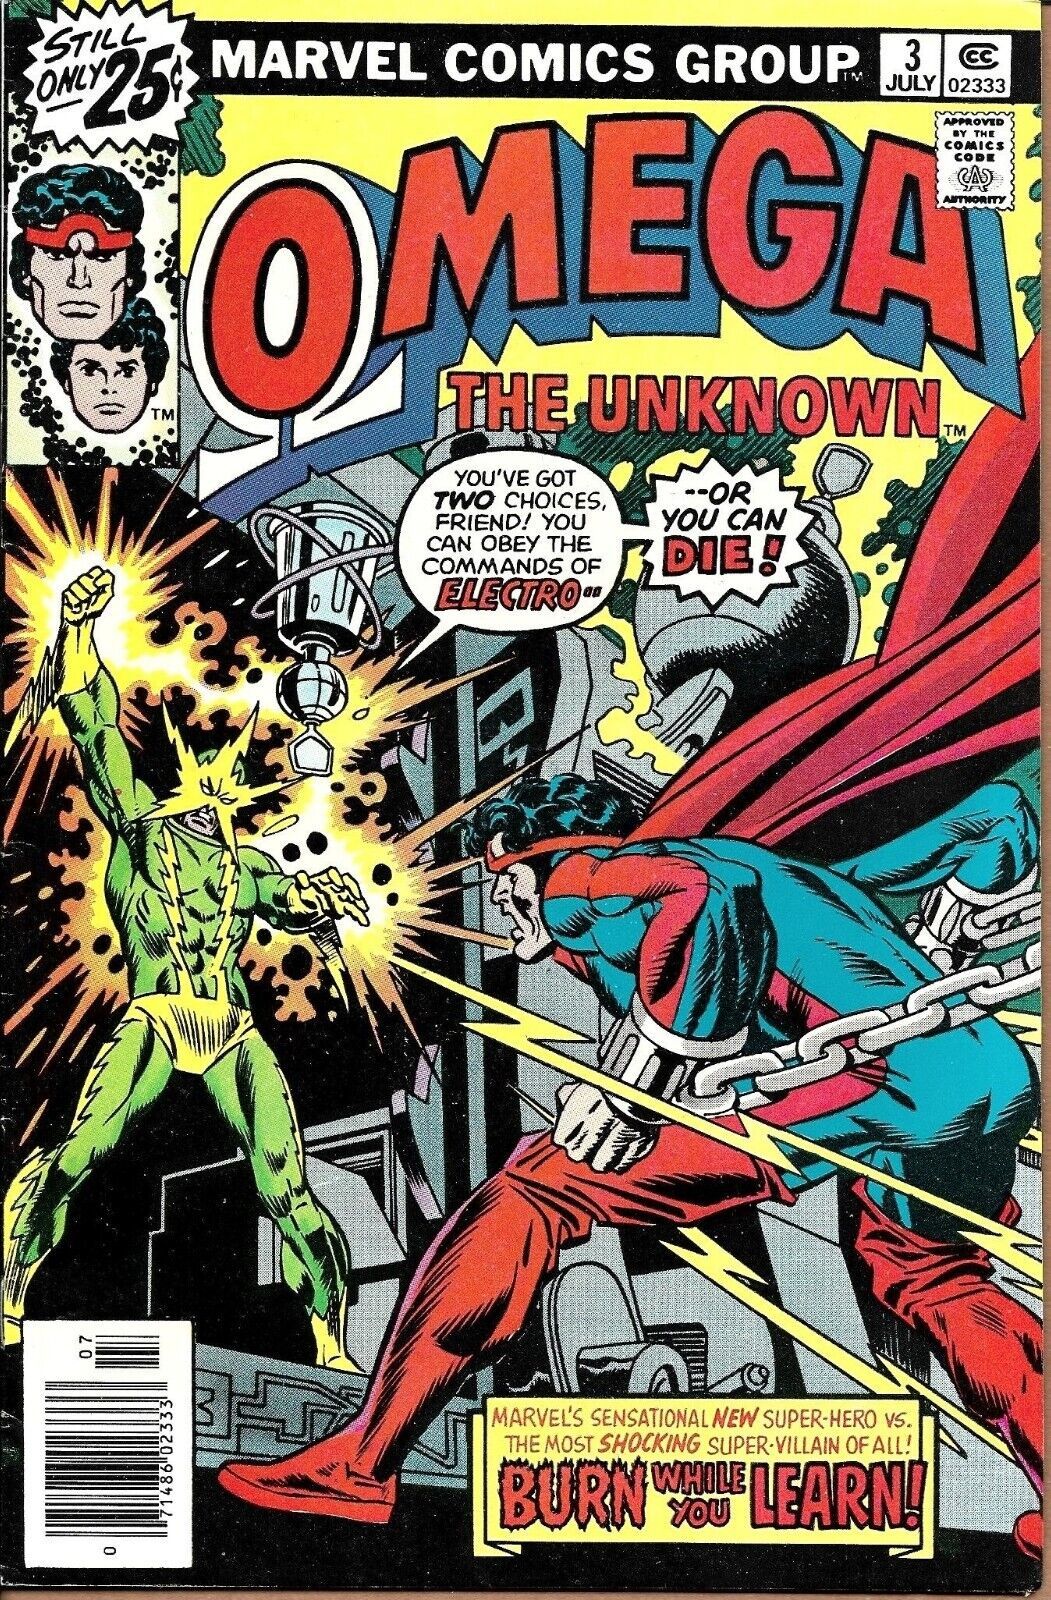 Omega the Unknown Vol. 1 #3 Marvel Comics (1976) Electro - $4.70